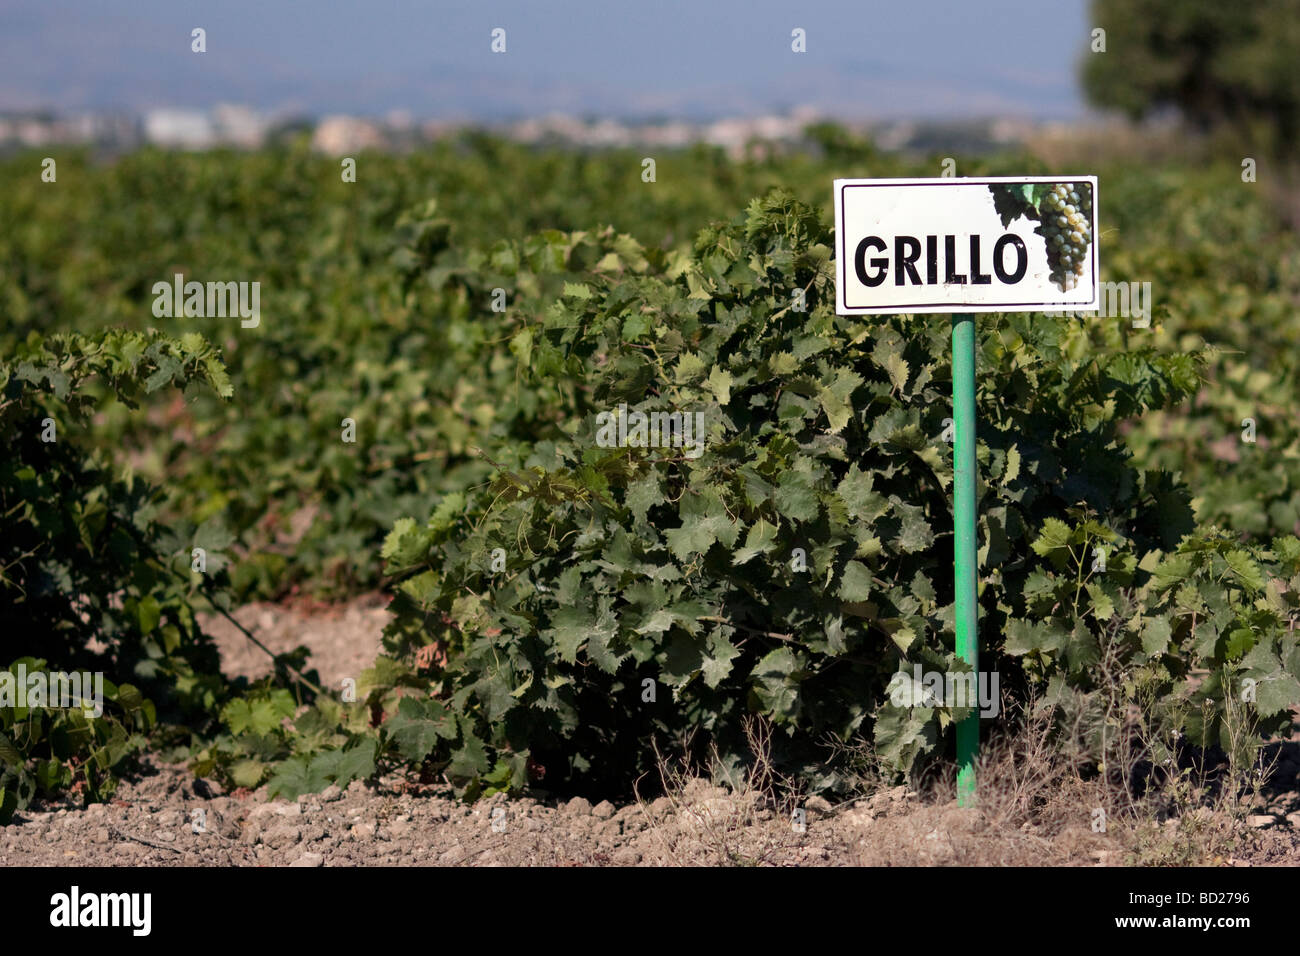 A sign marking a vineyard of the Grillo varietal on the island of Motya, off the western coast of Sicily. Stock Photo